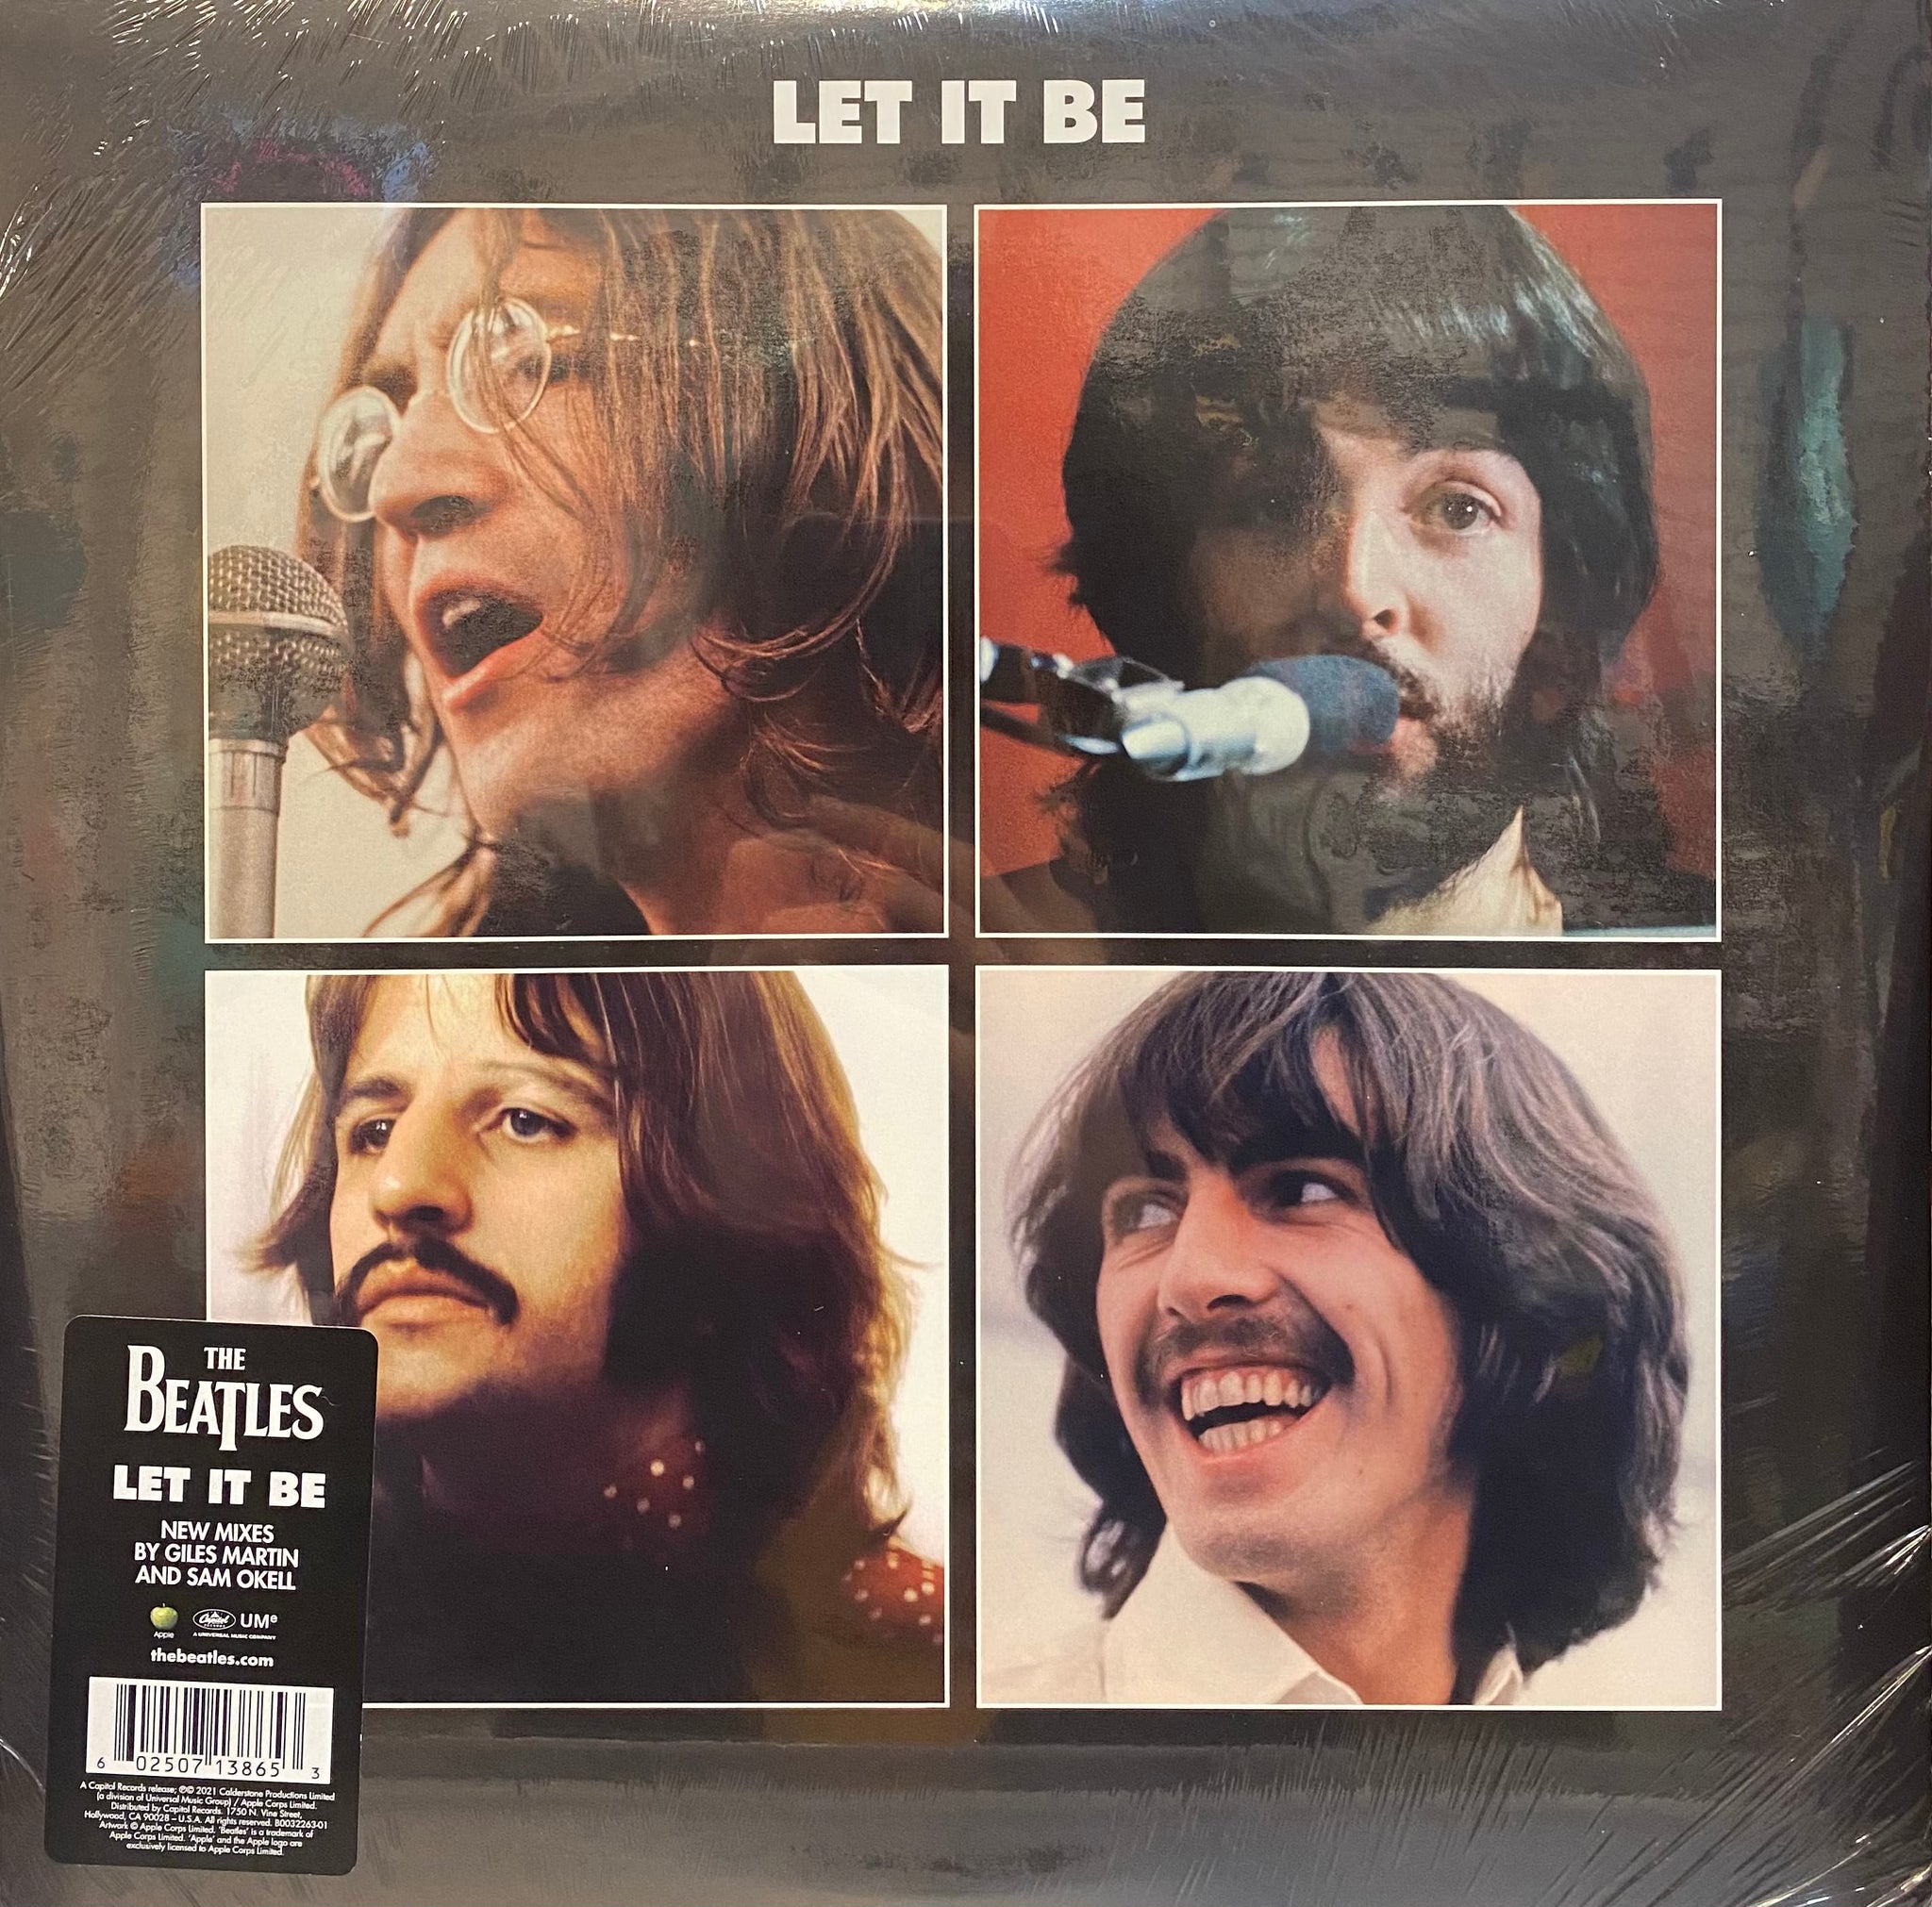 THE BEATLES  Corporate records for The Beatles (USA) Limited